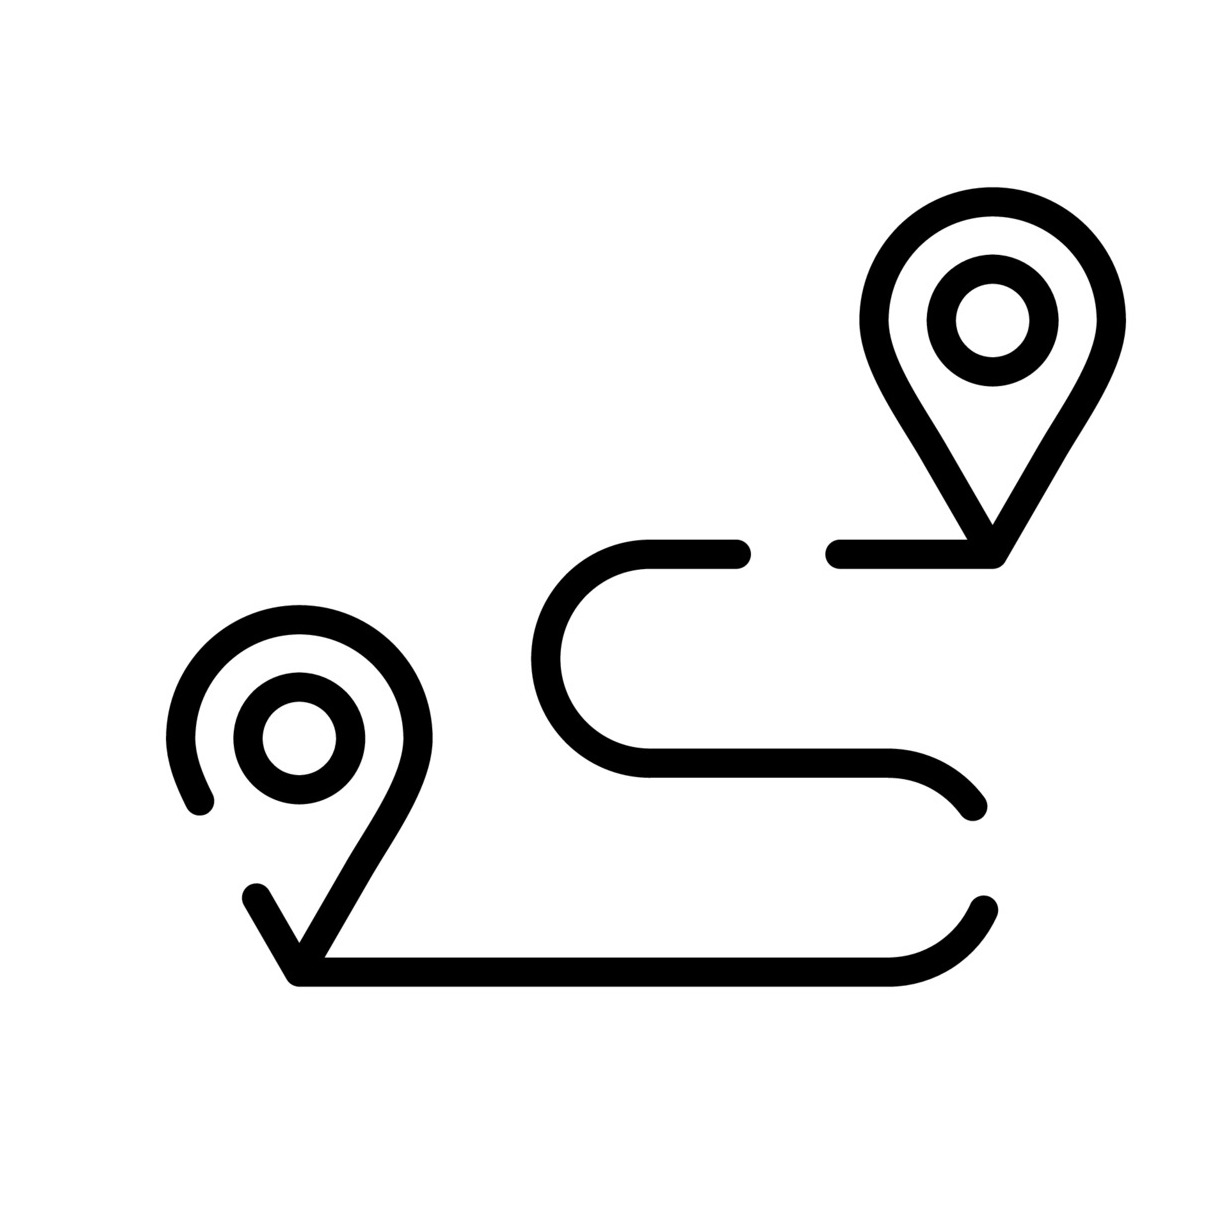 Vecteezy Gps Map Navigation Direction Dotted Line Icon Vector 11328791 2